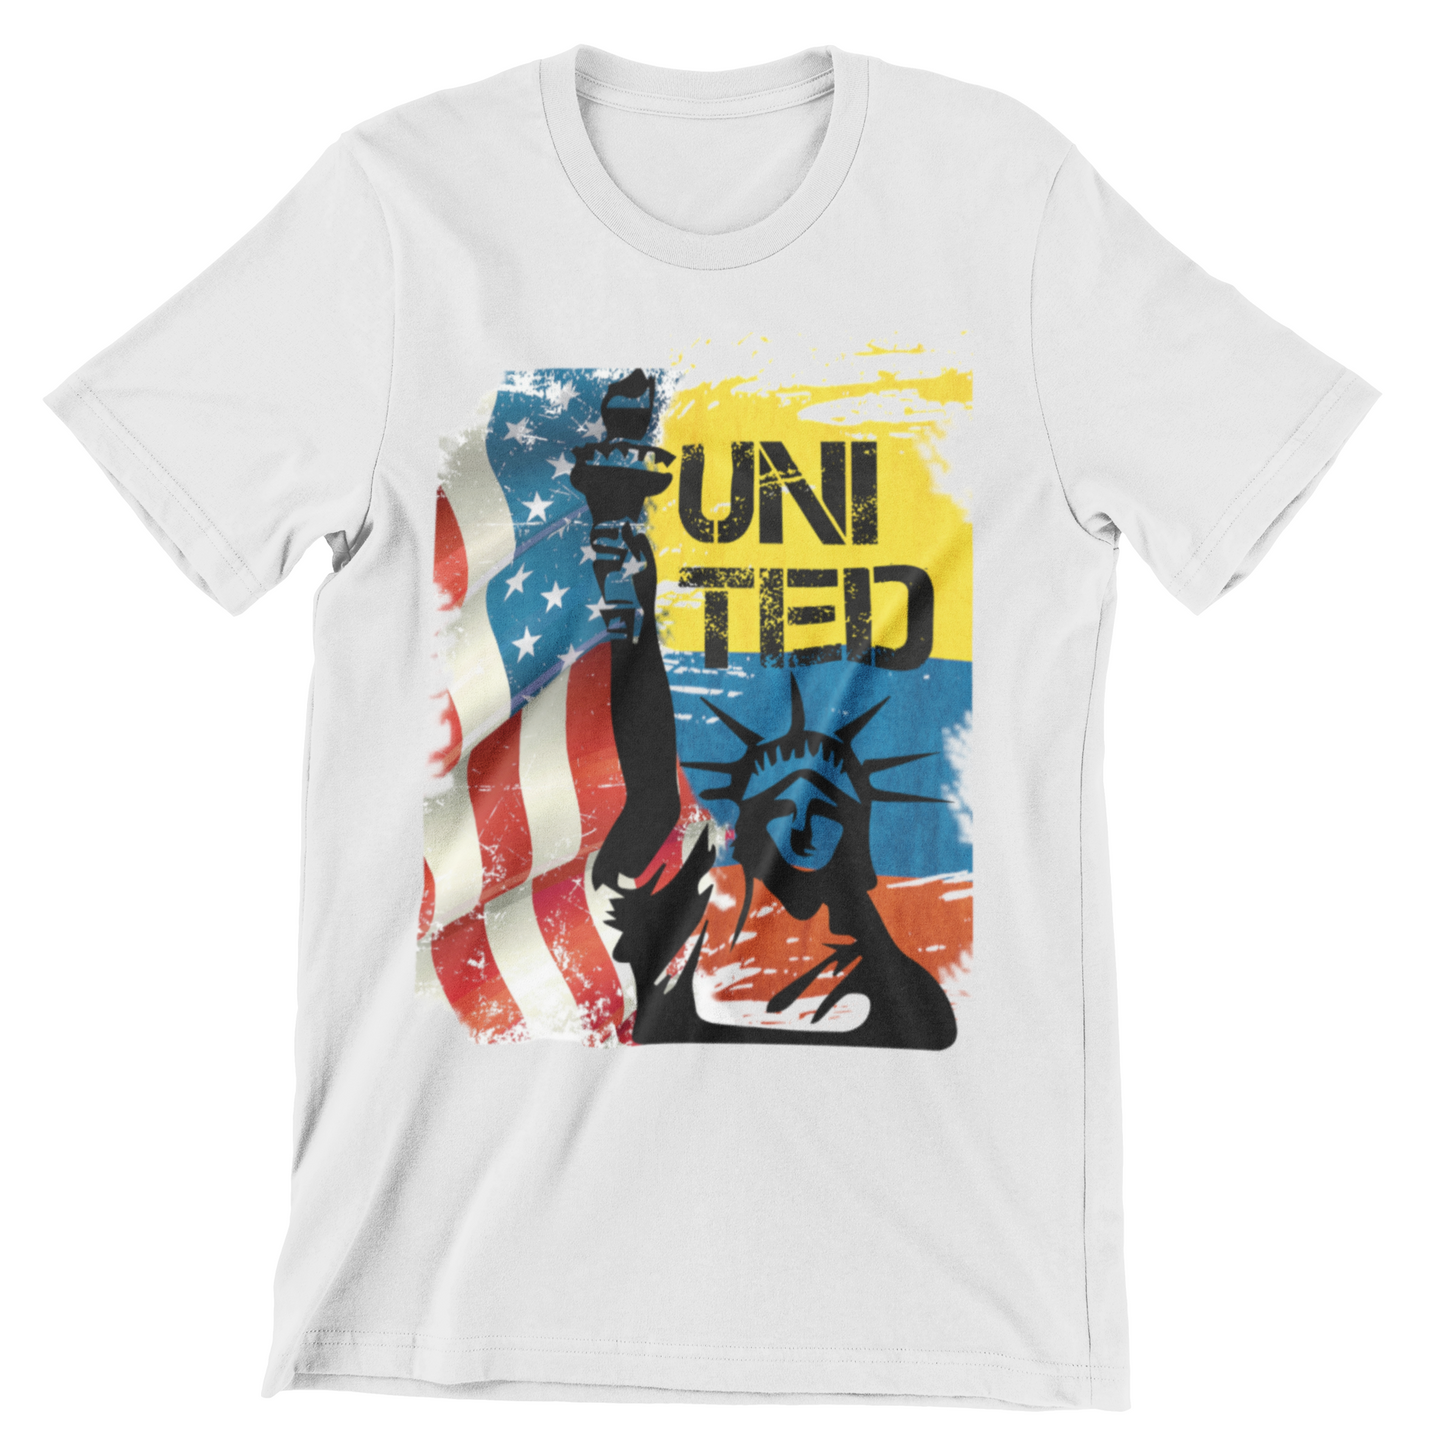 Colombia United T-Shirt